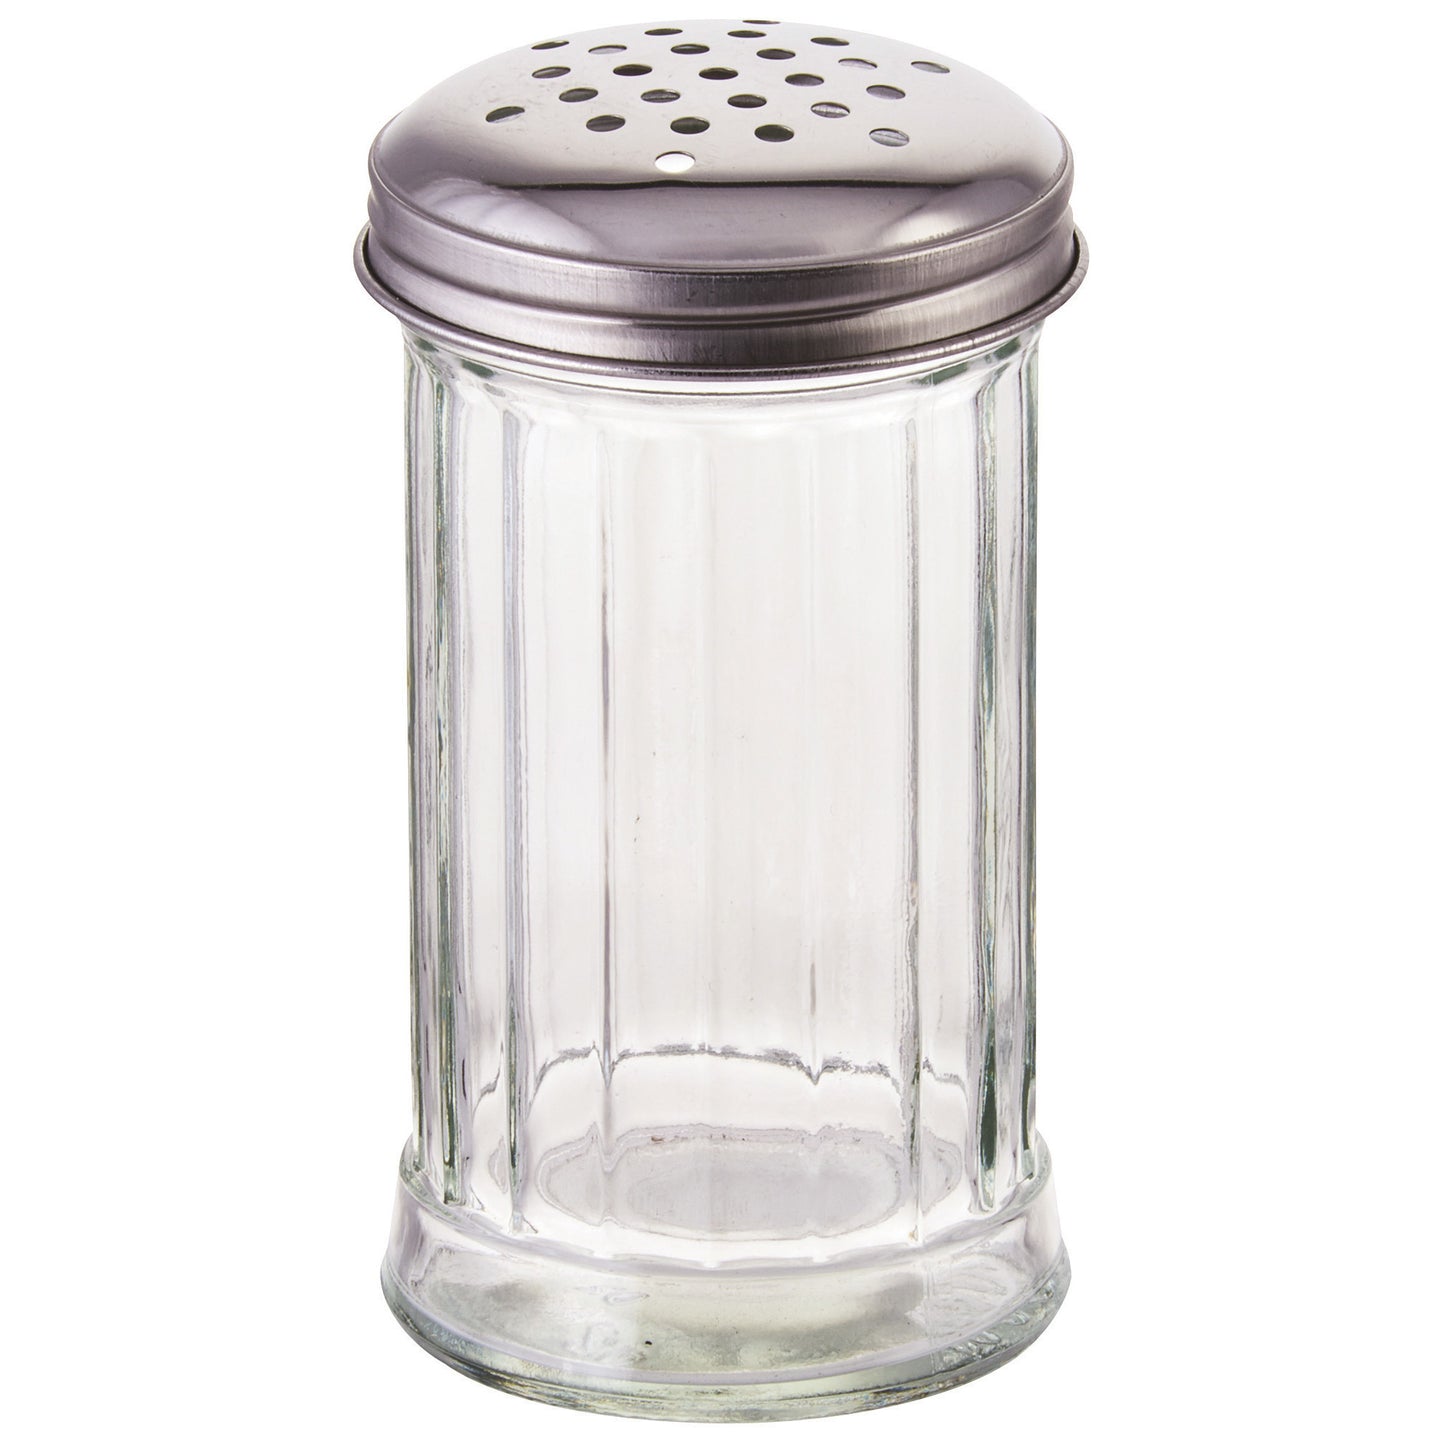 G-103 - Cheese/Spice Shaker, 12 oz, Perforated Top